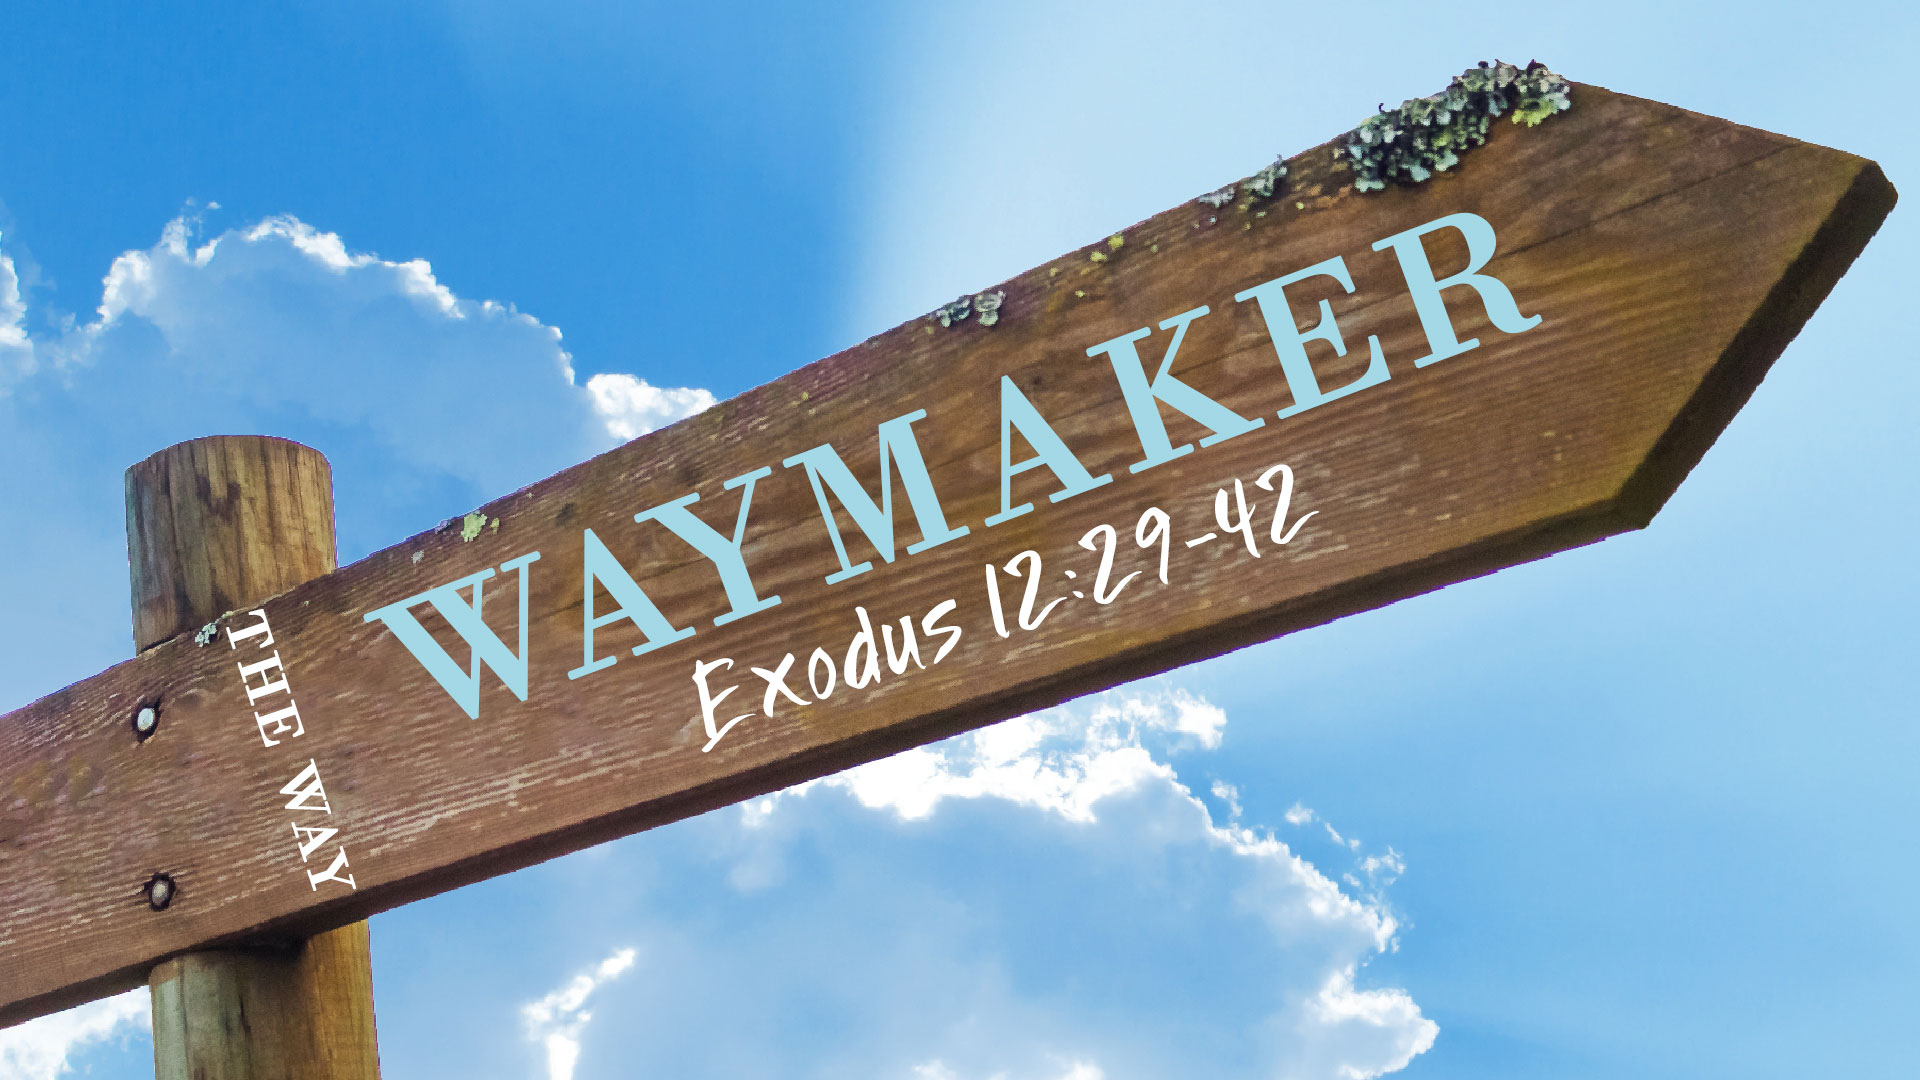  The Way, part 4: Waymaker  Image